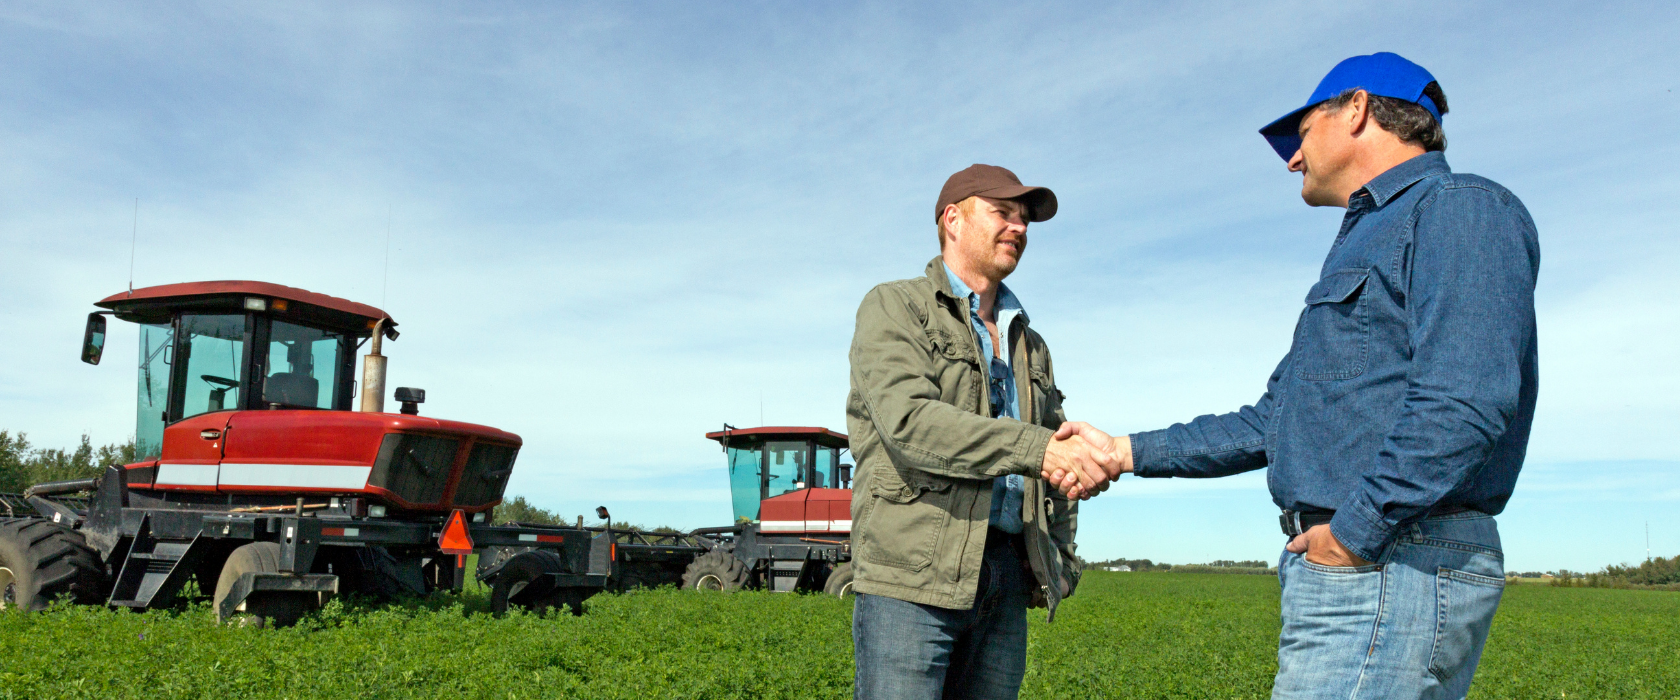 local banker shaking hands with a farmer in an alfalfa field with windrows behind them